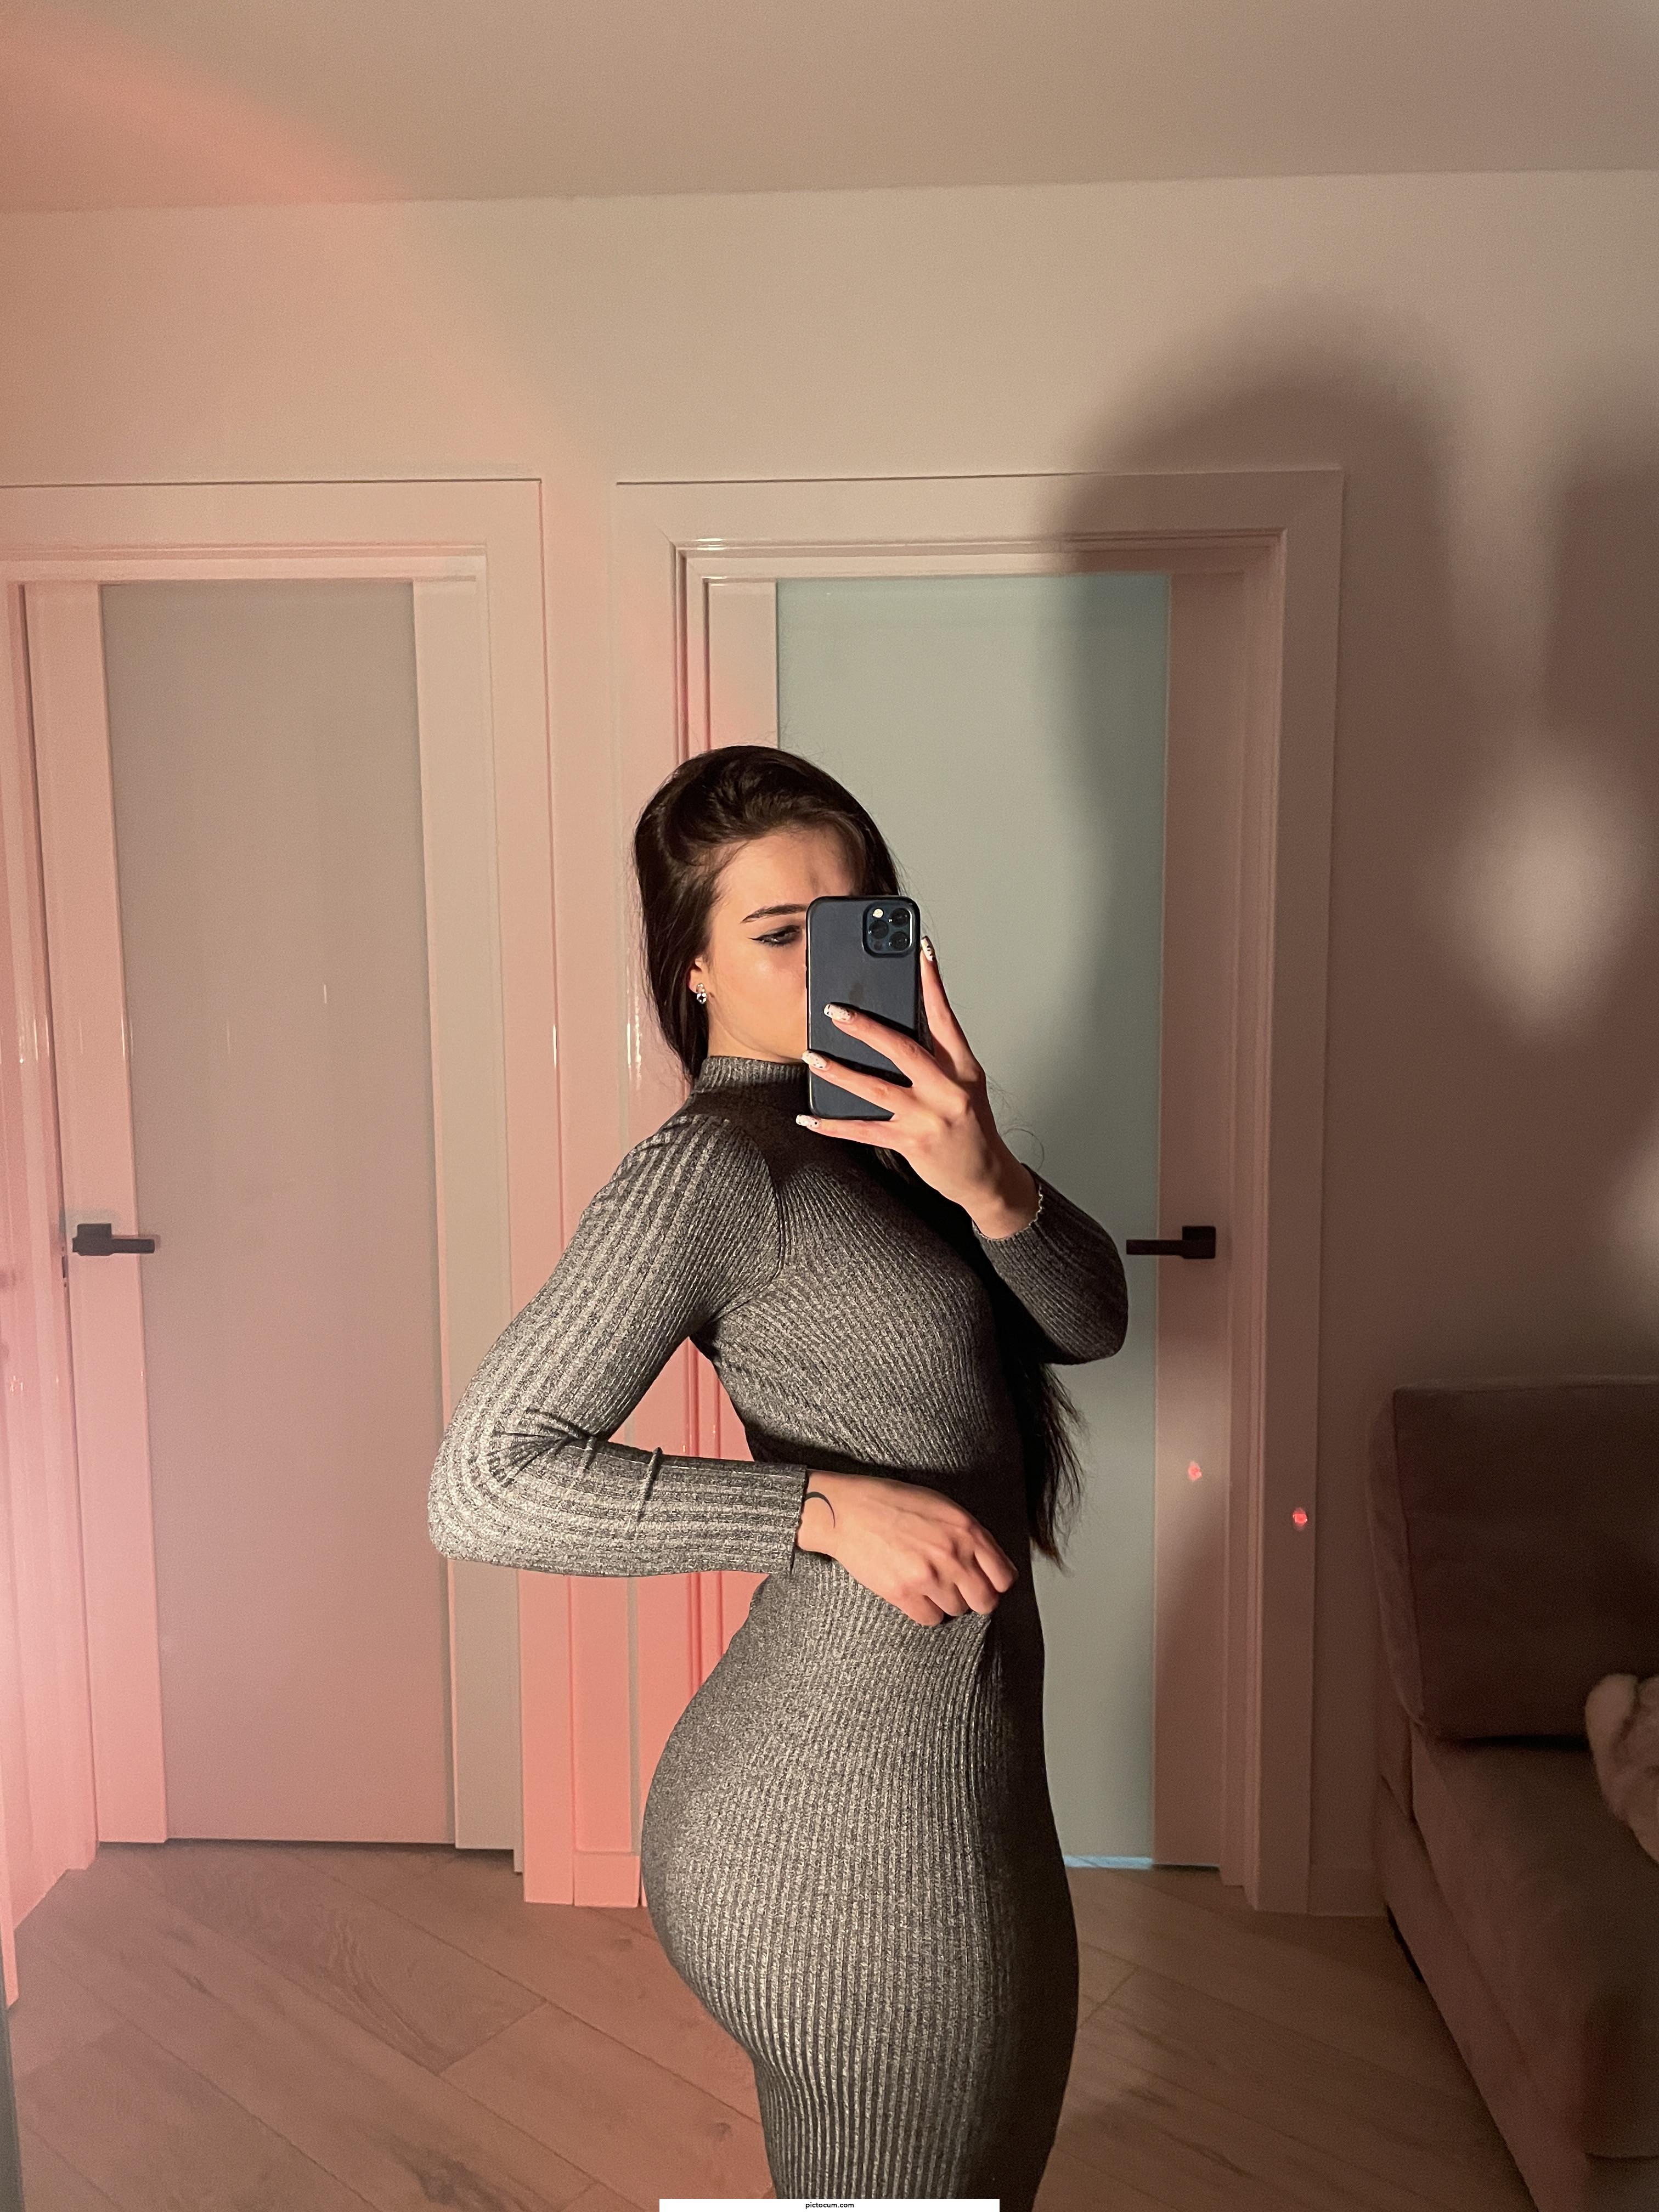 My ass is amazing in this dress